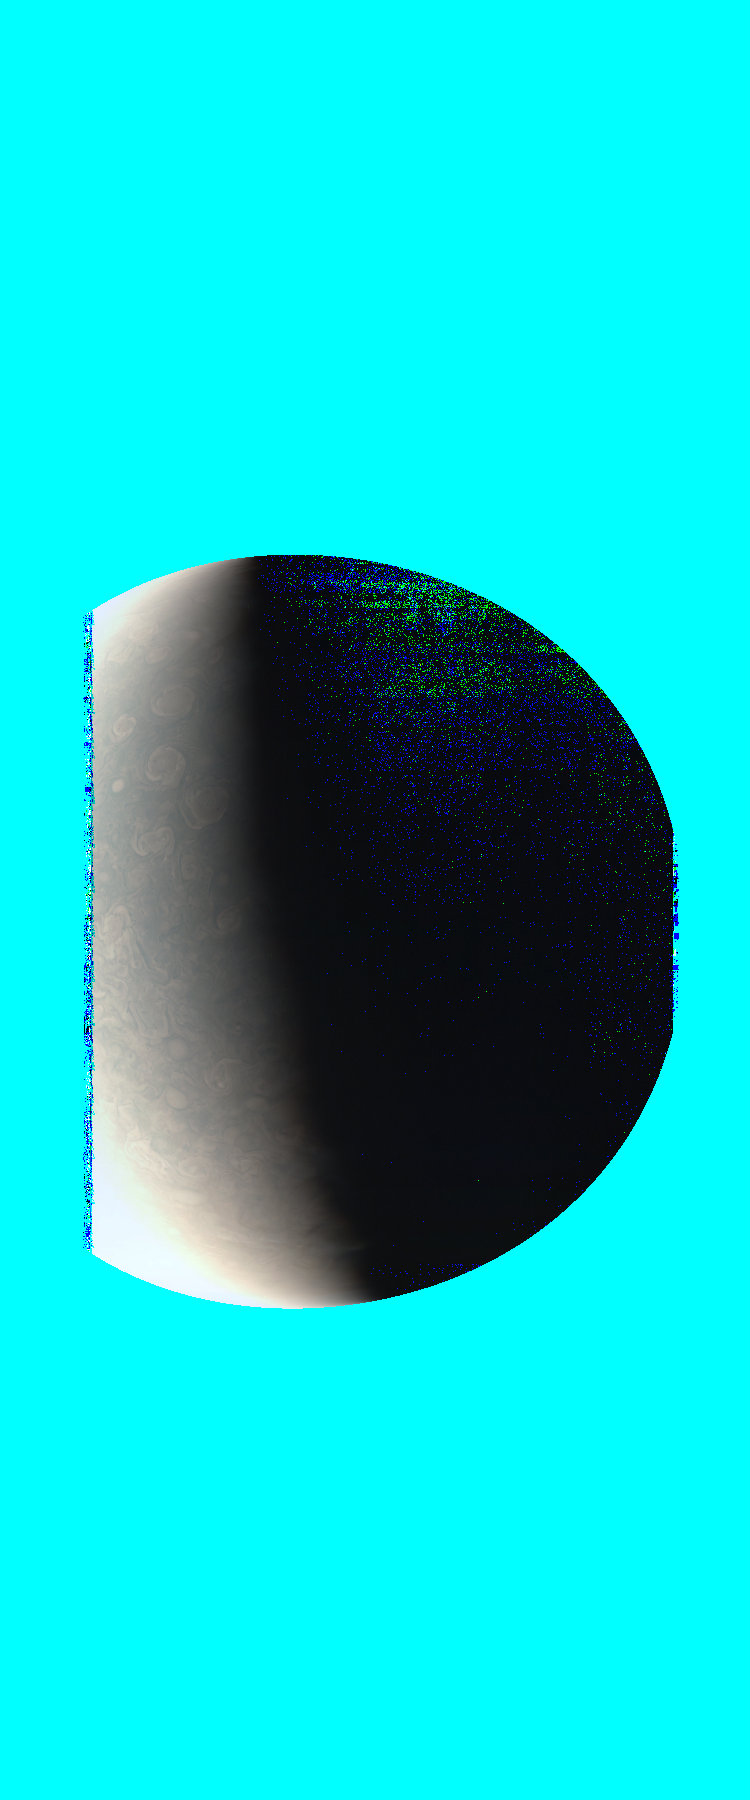 JNCE_2020313_30C00006_V01-raw.bmp_mask_10px_30.055400s_cx810.0_000000_decompanded.bmp_sphC_.png